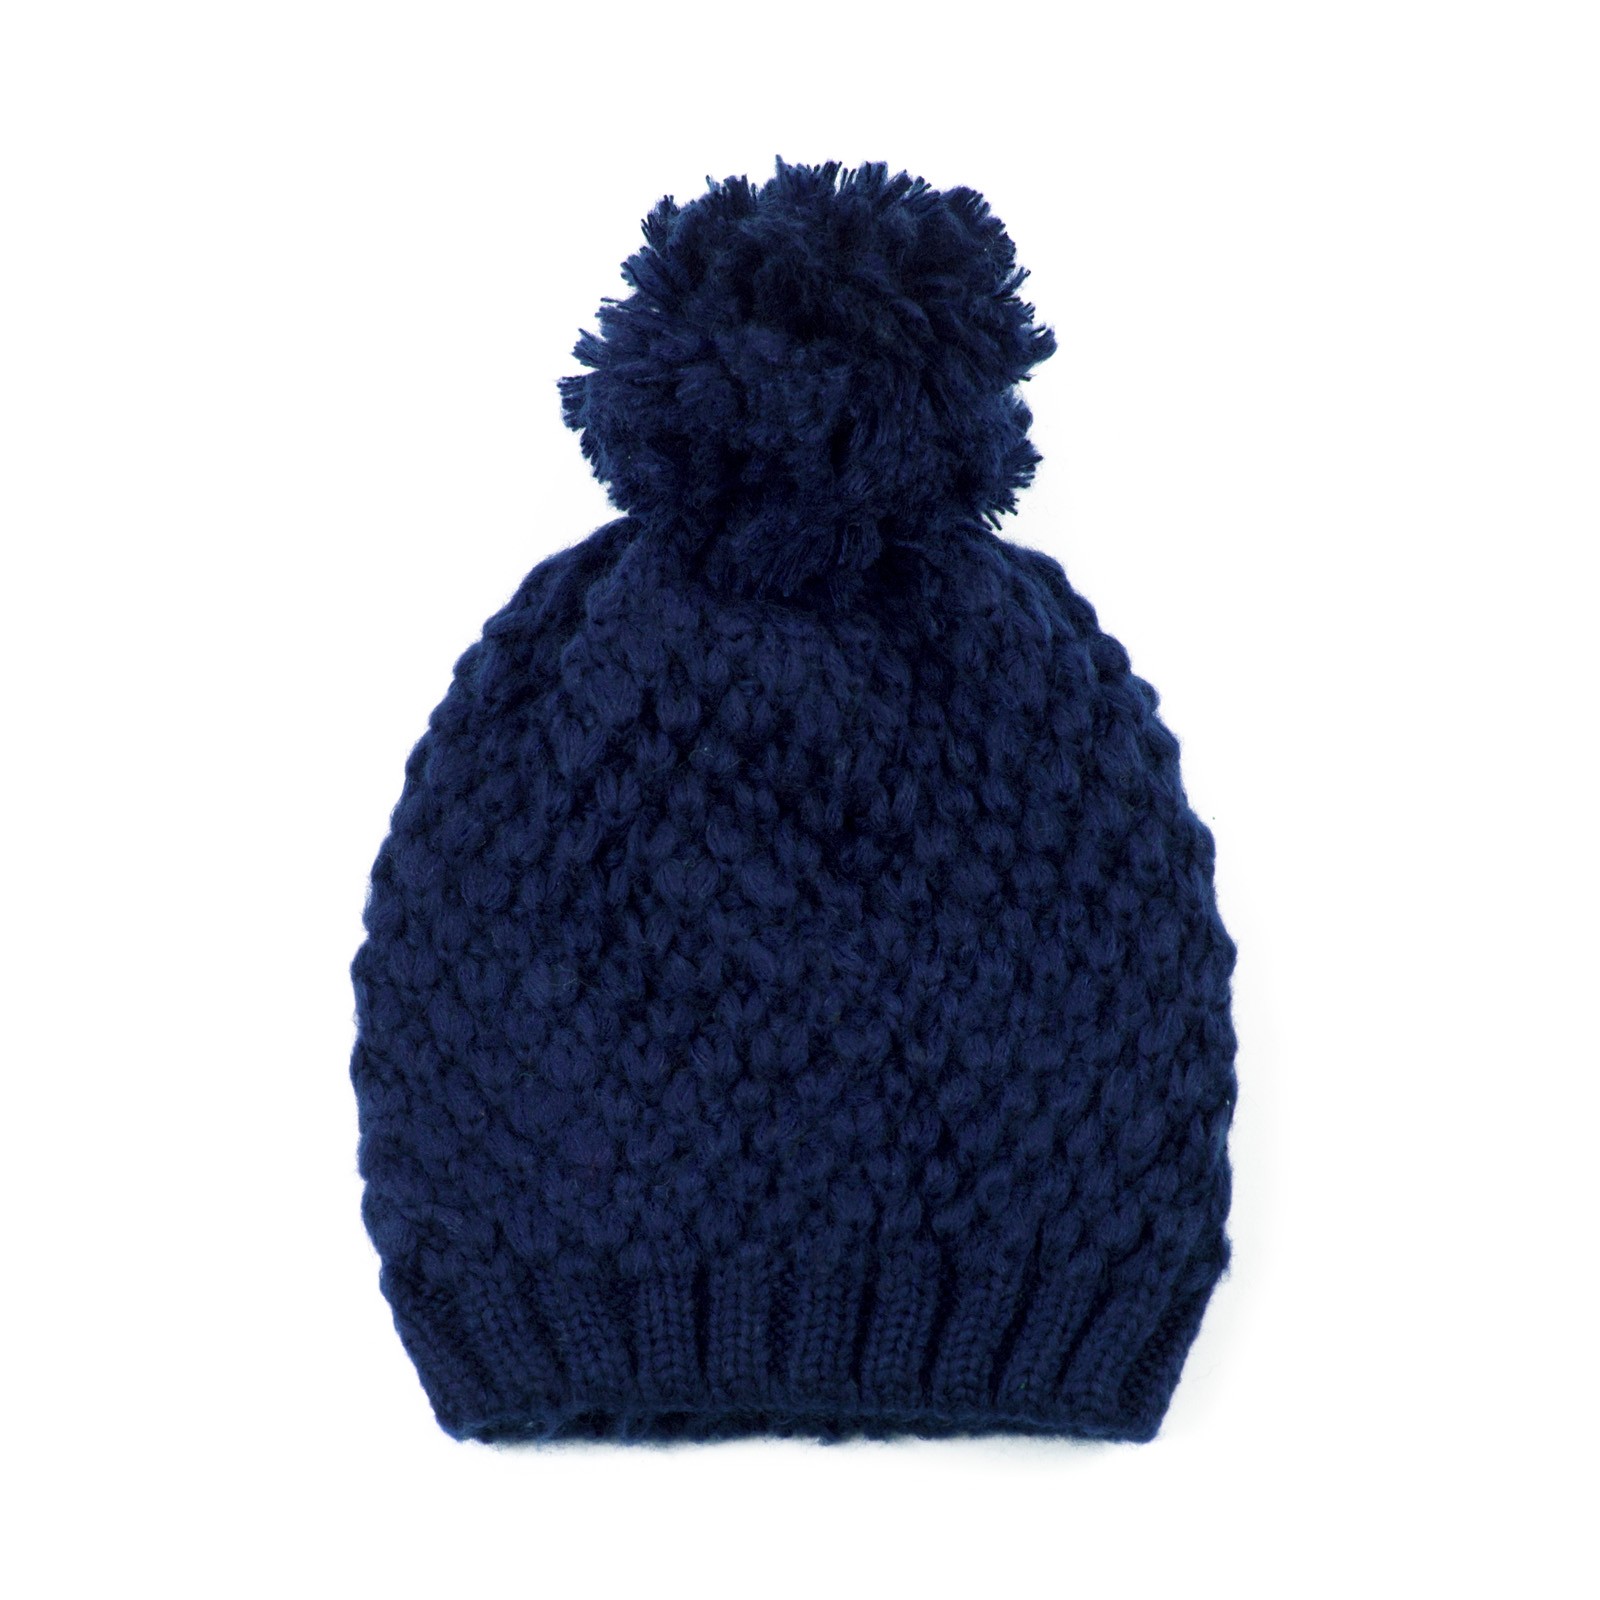 Art Of Polo Woman's Hat cz14294-14 Navy Blue